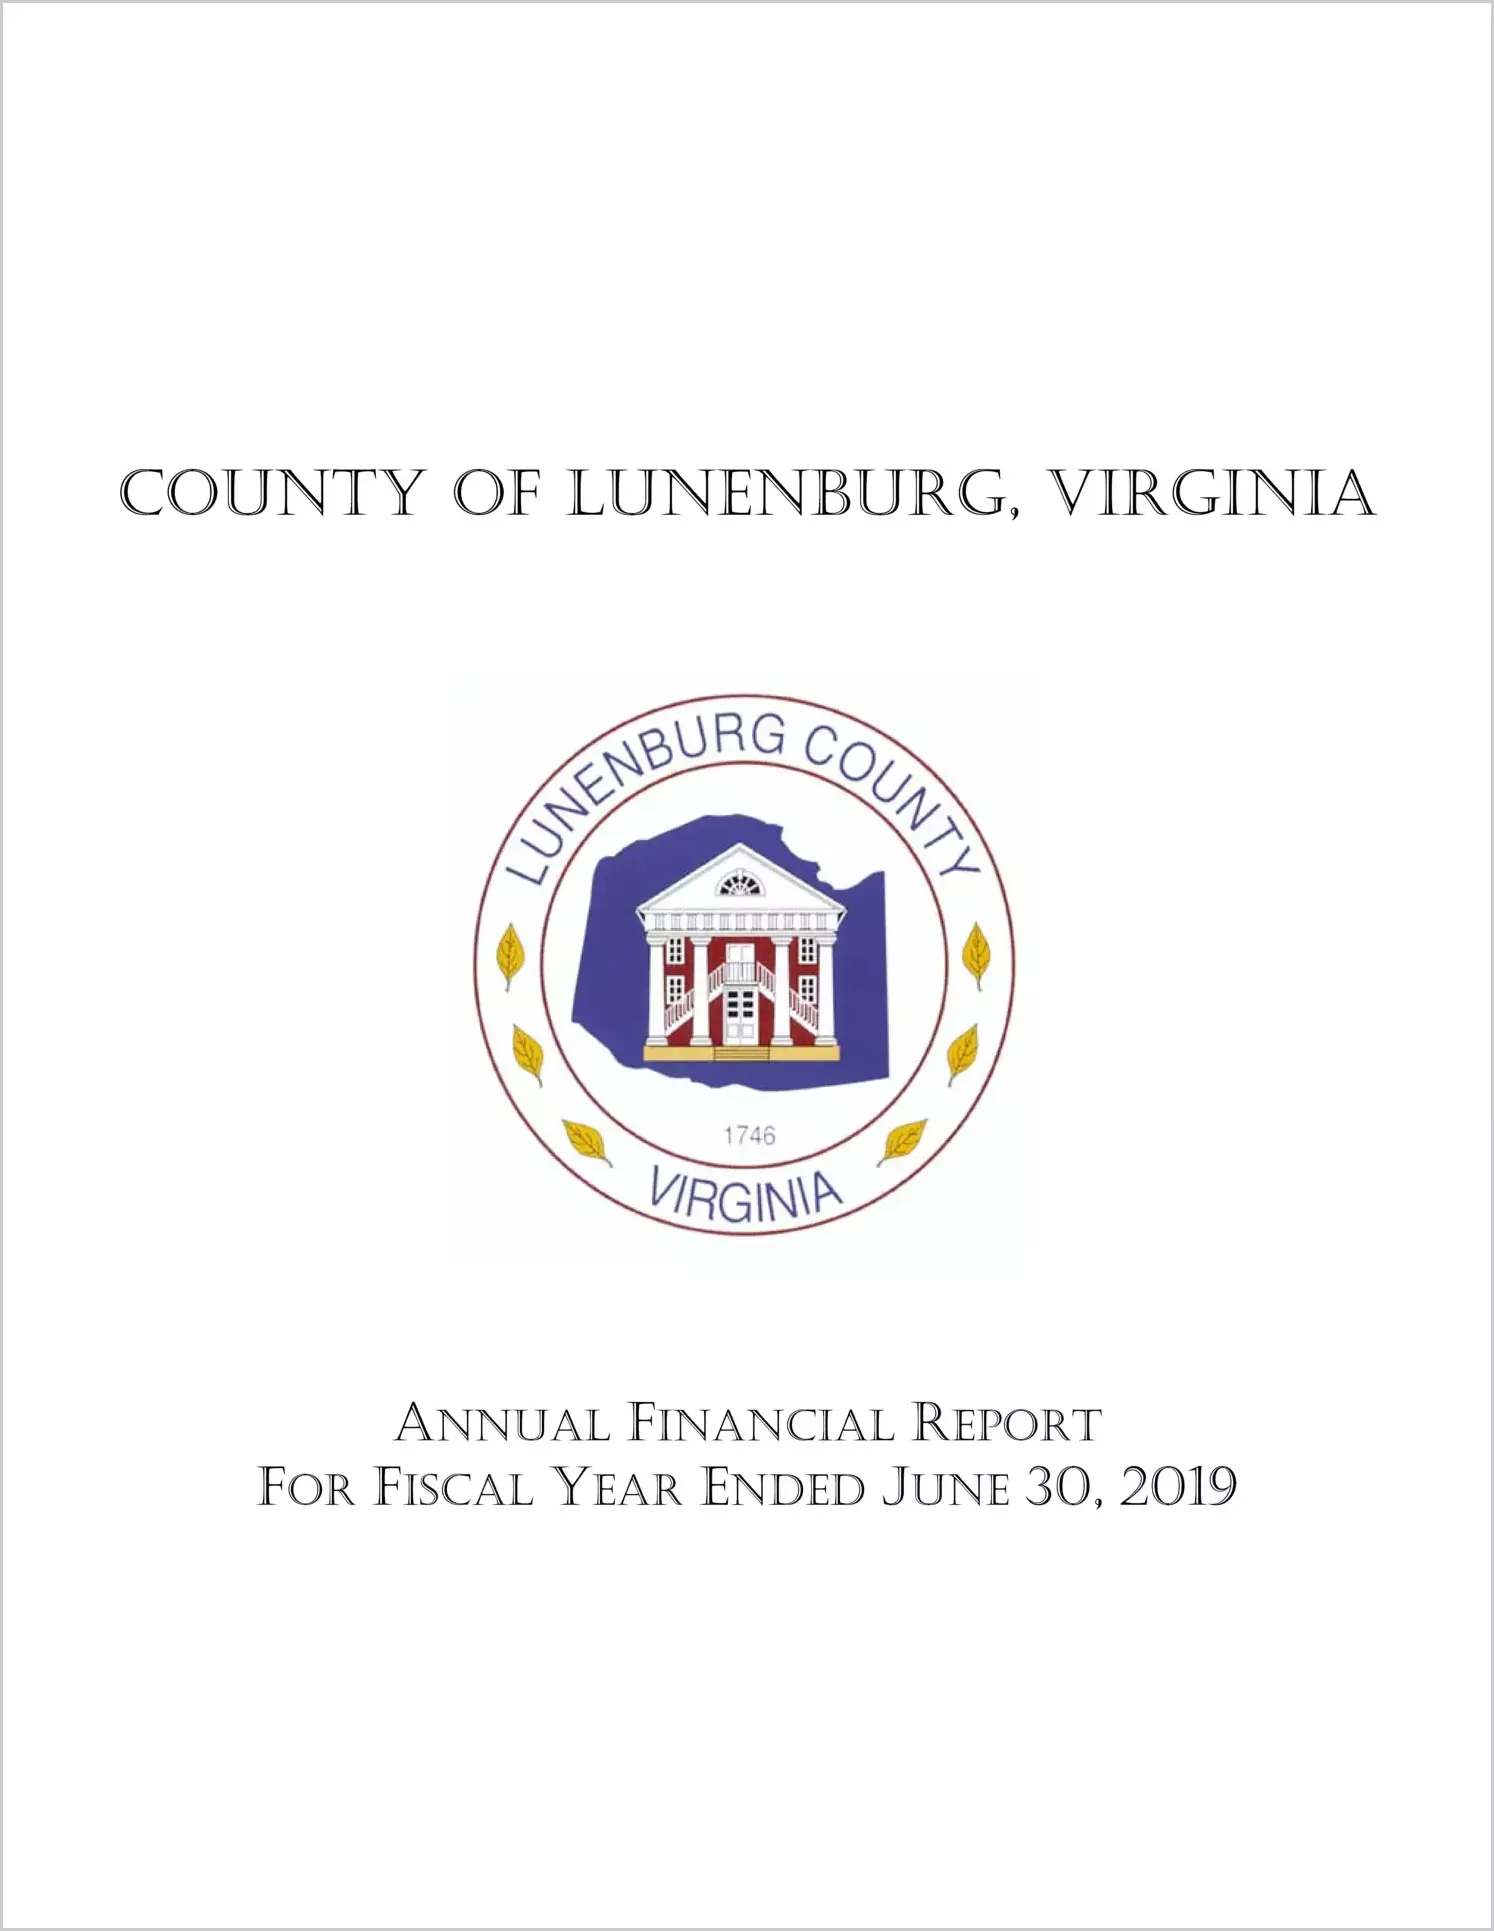 2019 Annual Financial Report for County of Lunenburg